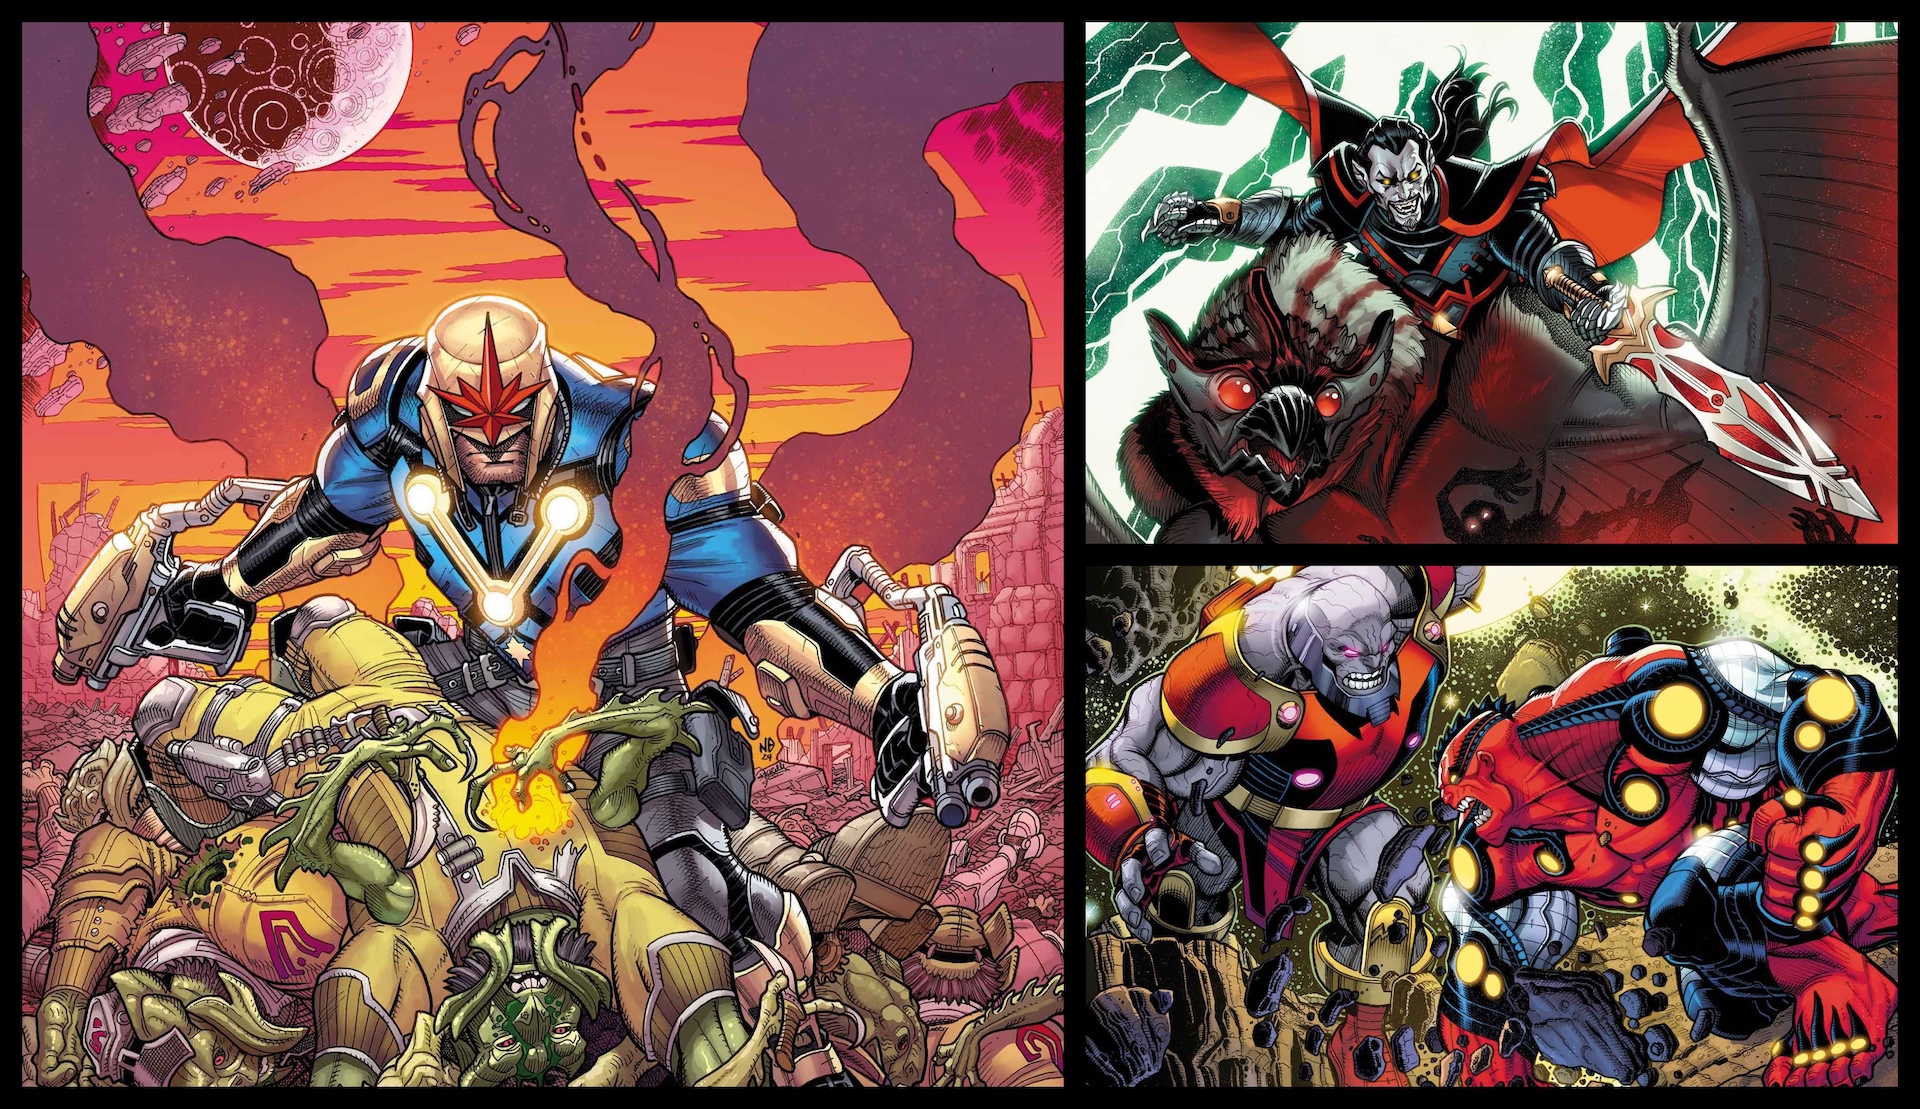 Marvel to explore cosmic side of 2099 with all-new 2099 heroes and villains